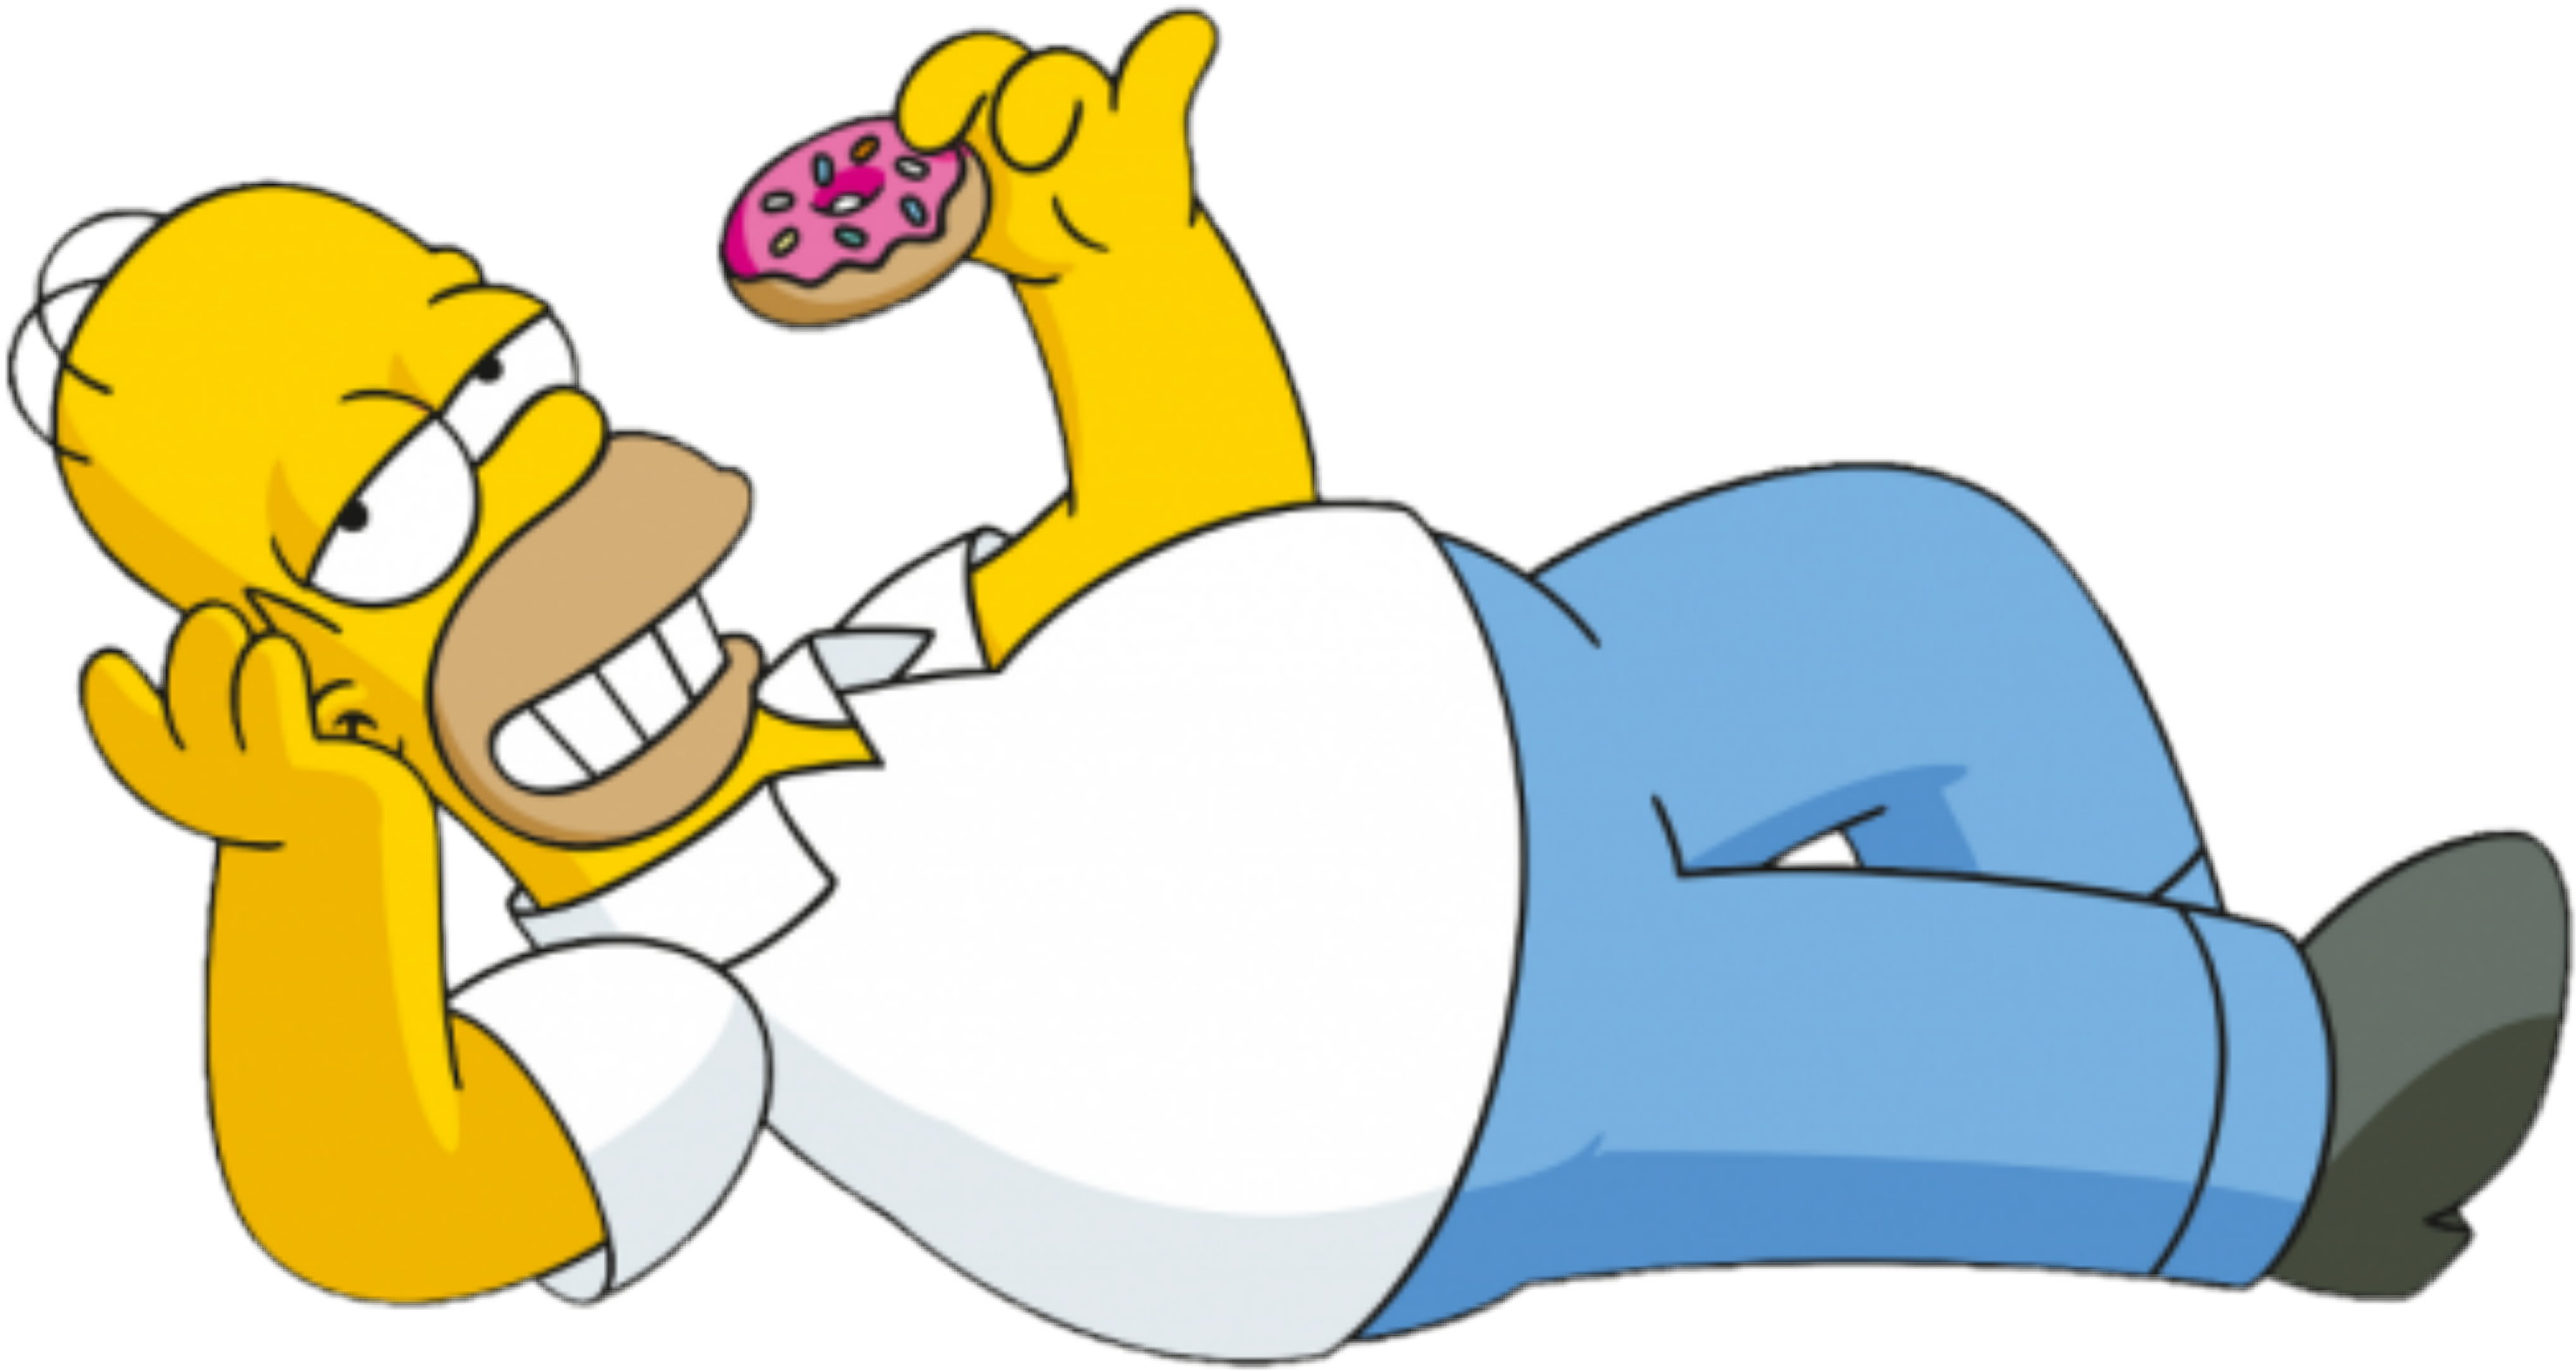 This visual is about homer homero scfastfoods fastfoods simpson freetoedit ...